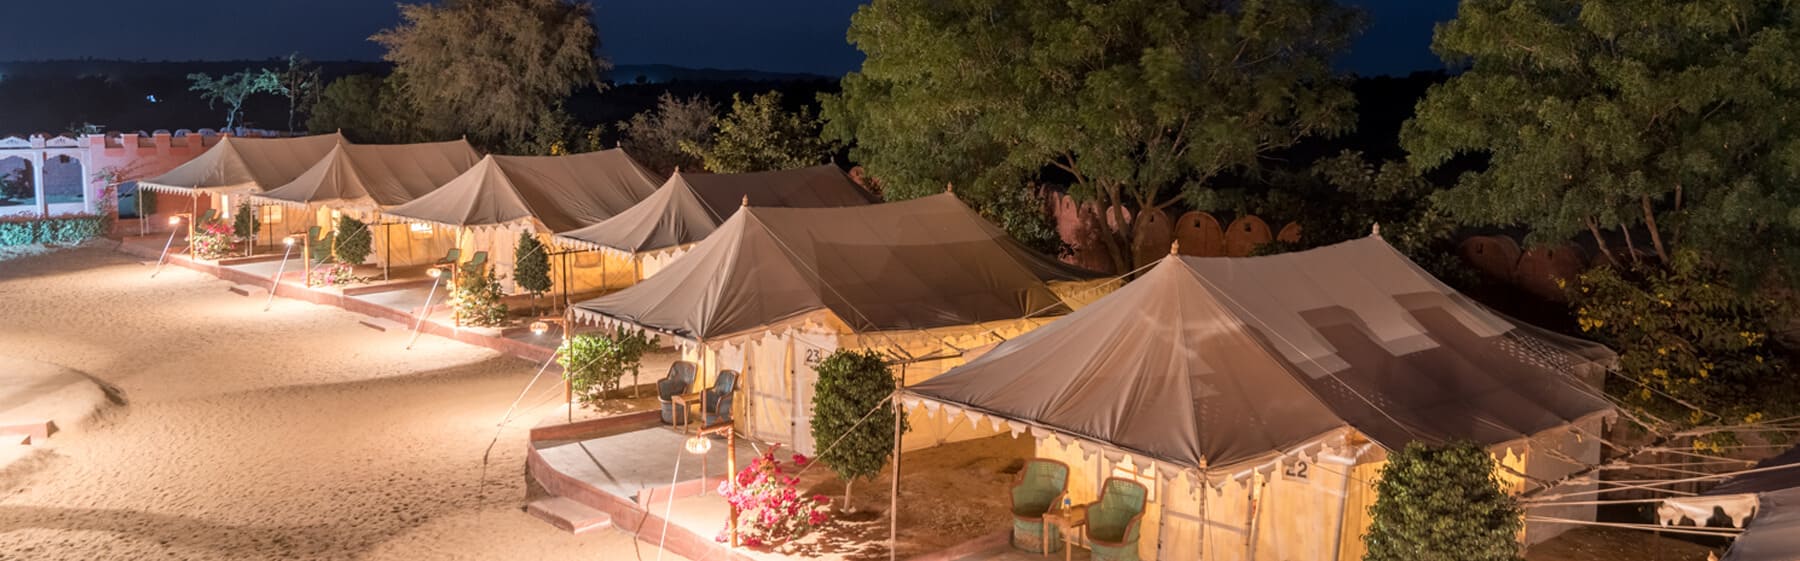 Enjoy best stay in camps in Rajasthan at osian desert camp Jodhpur